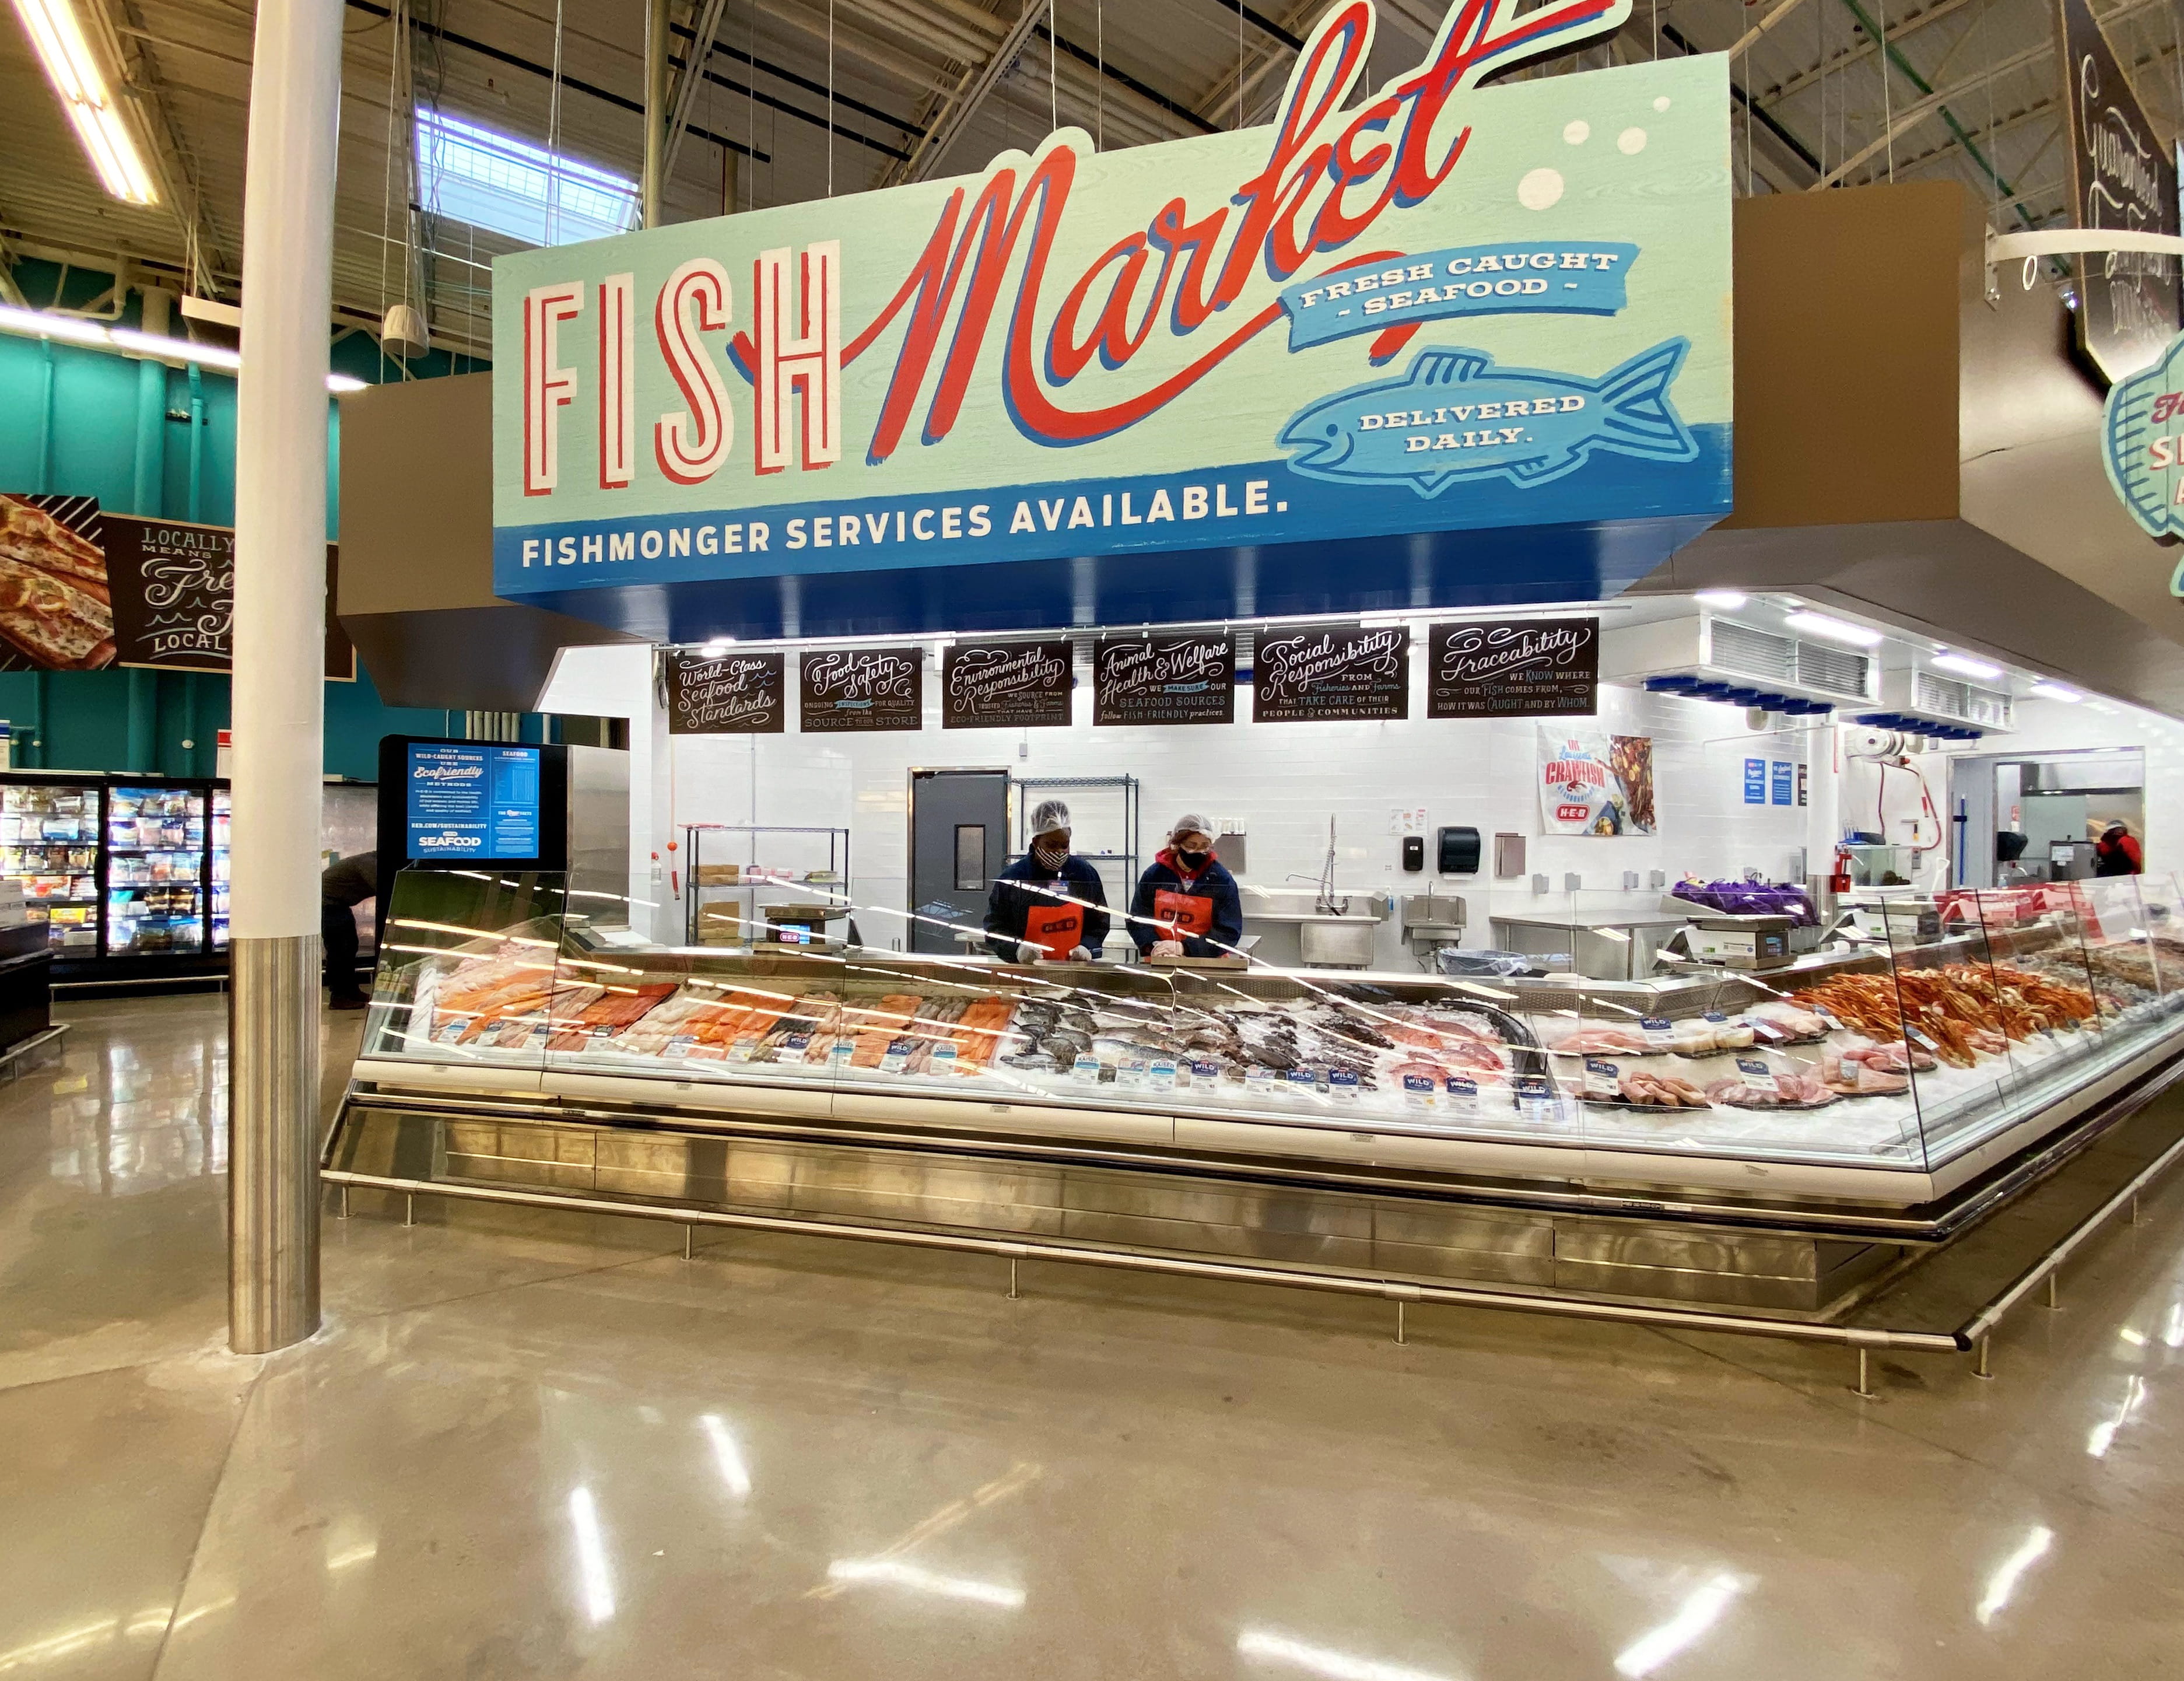 DSFN in store seafood HEB Fish Market